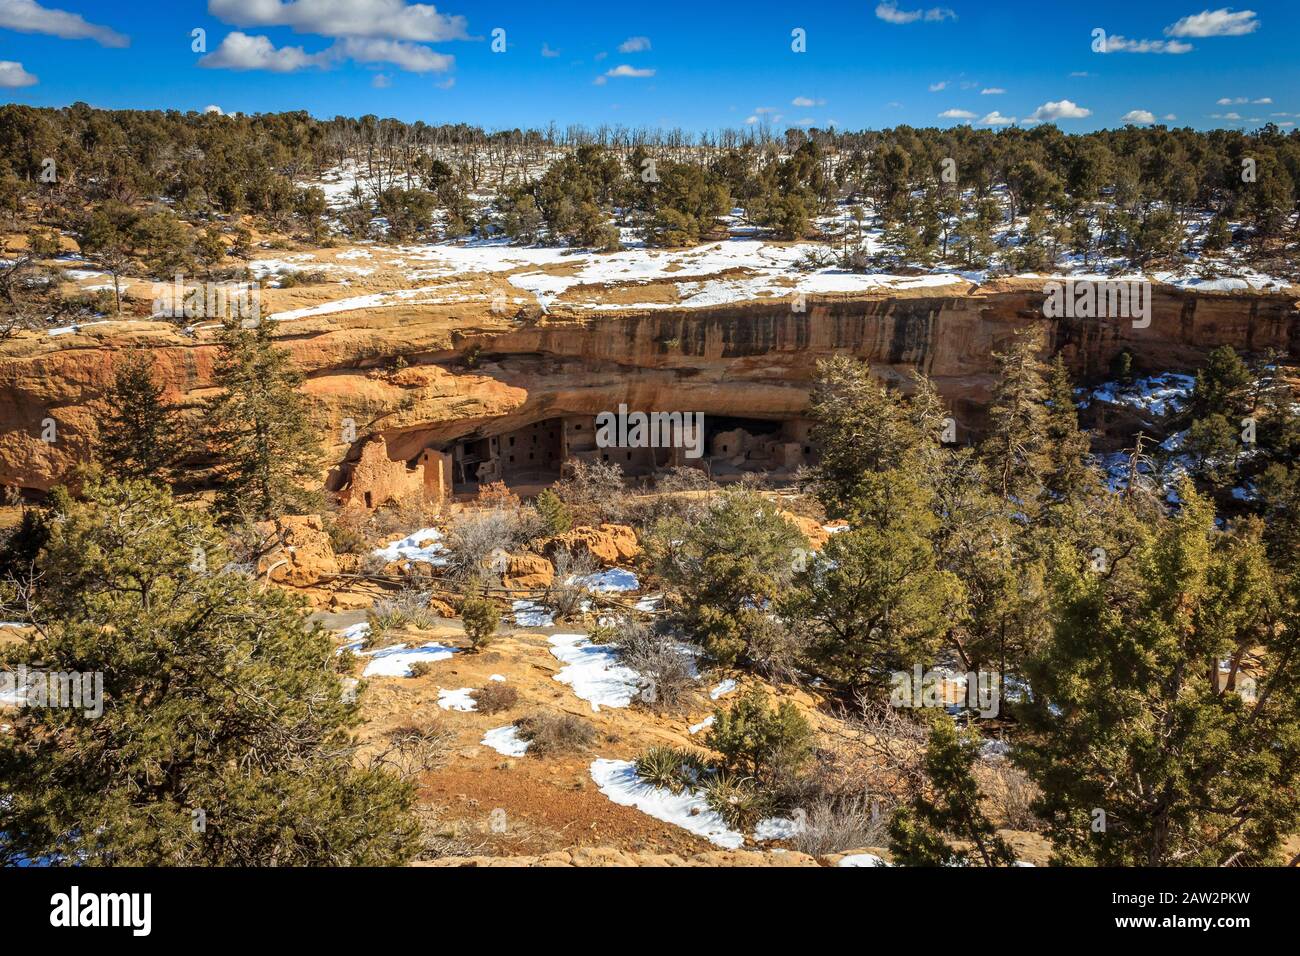 The first view of Spruce Tree House in Mesa Verde National Park, Colorado, USA Stock Photo